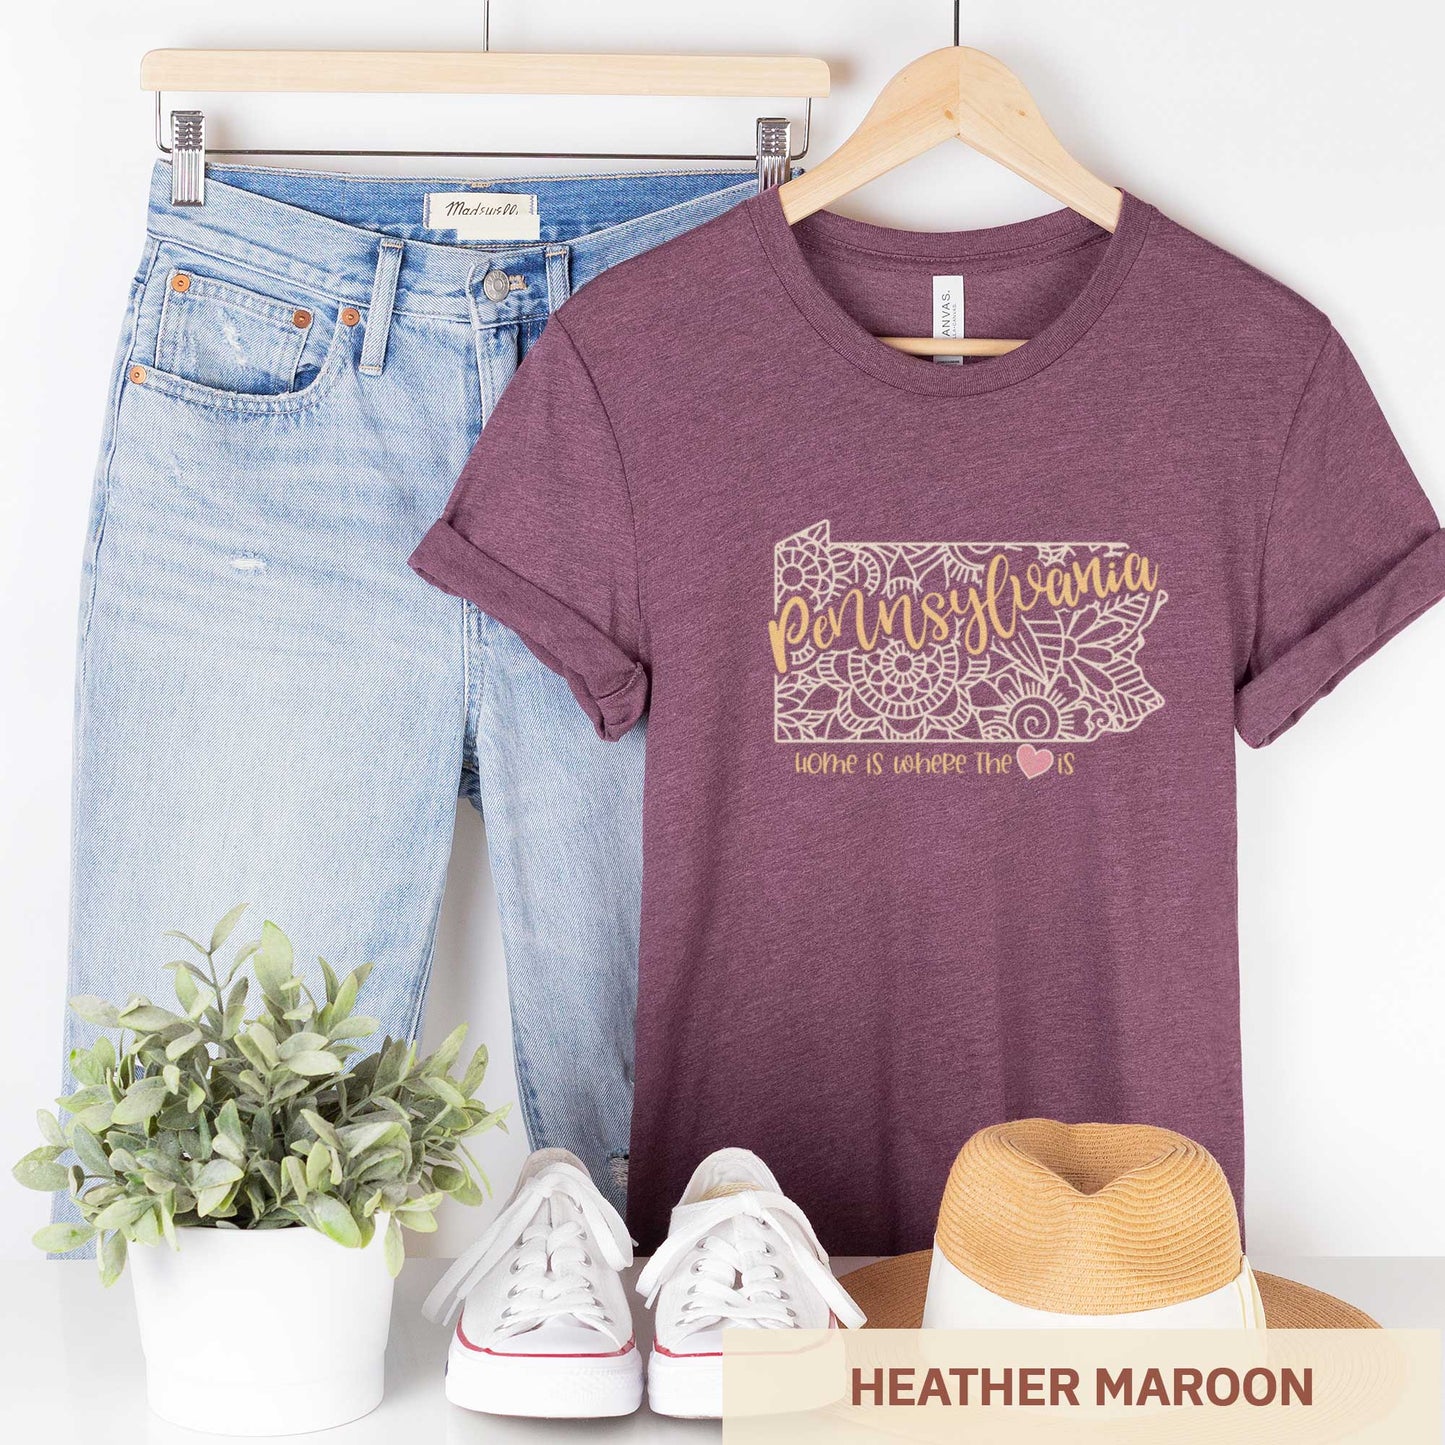 A hanging heather maroon Bella Canvas t-shirt featuring a mandala in the shape of Pennsylvania with the words home is where the heart is.